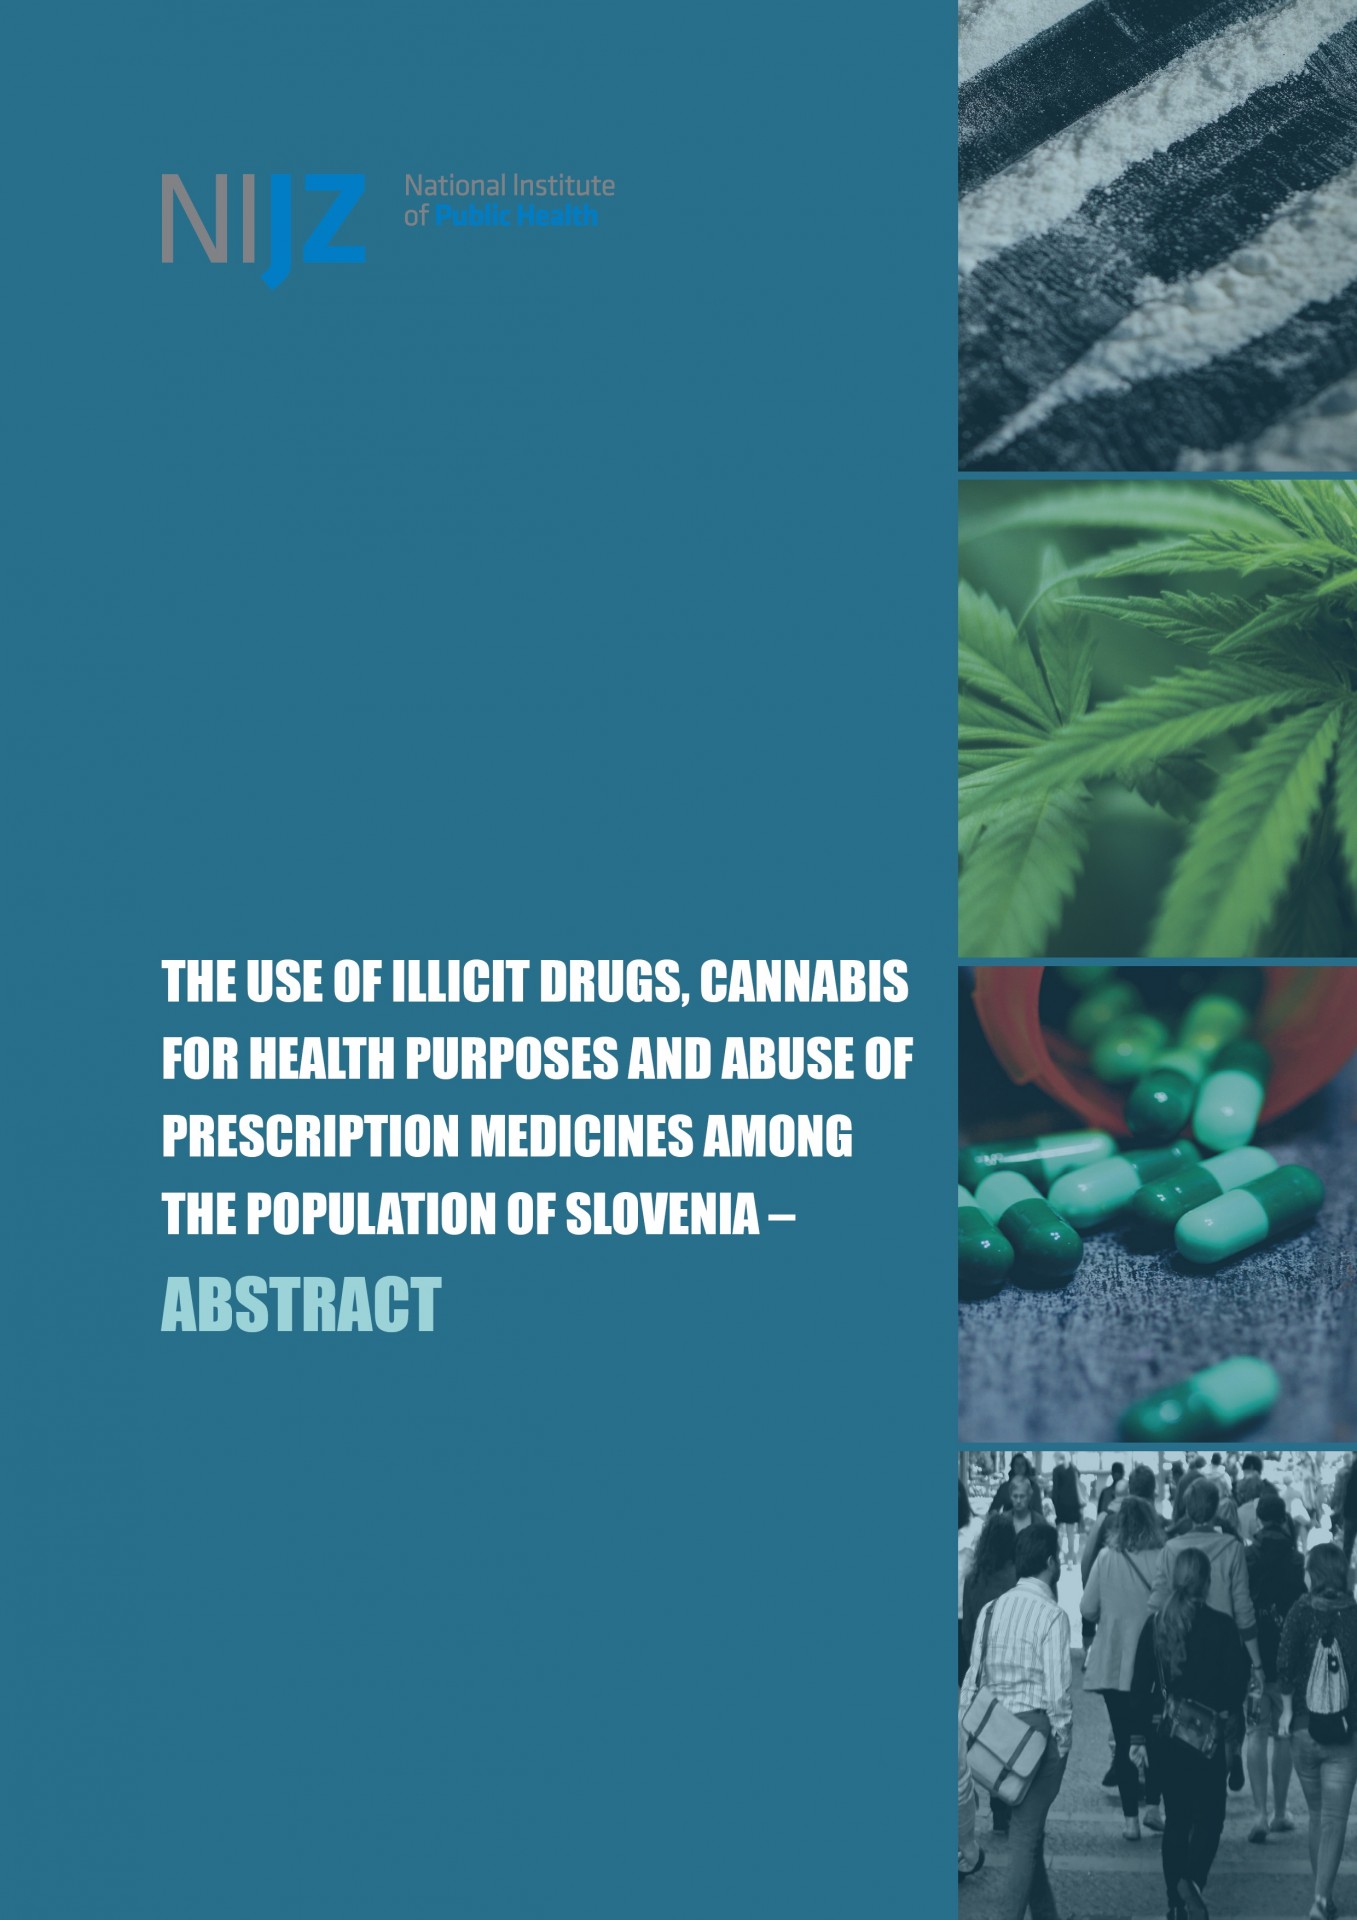 The use of illicit drugs, cannabis for health purposes and abuse of perscription medicines among the population of Slovenia – abstract